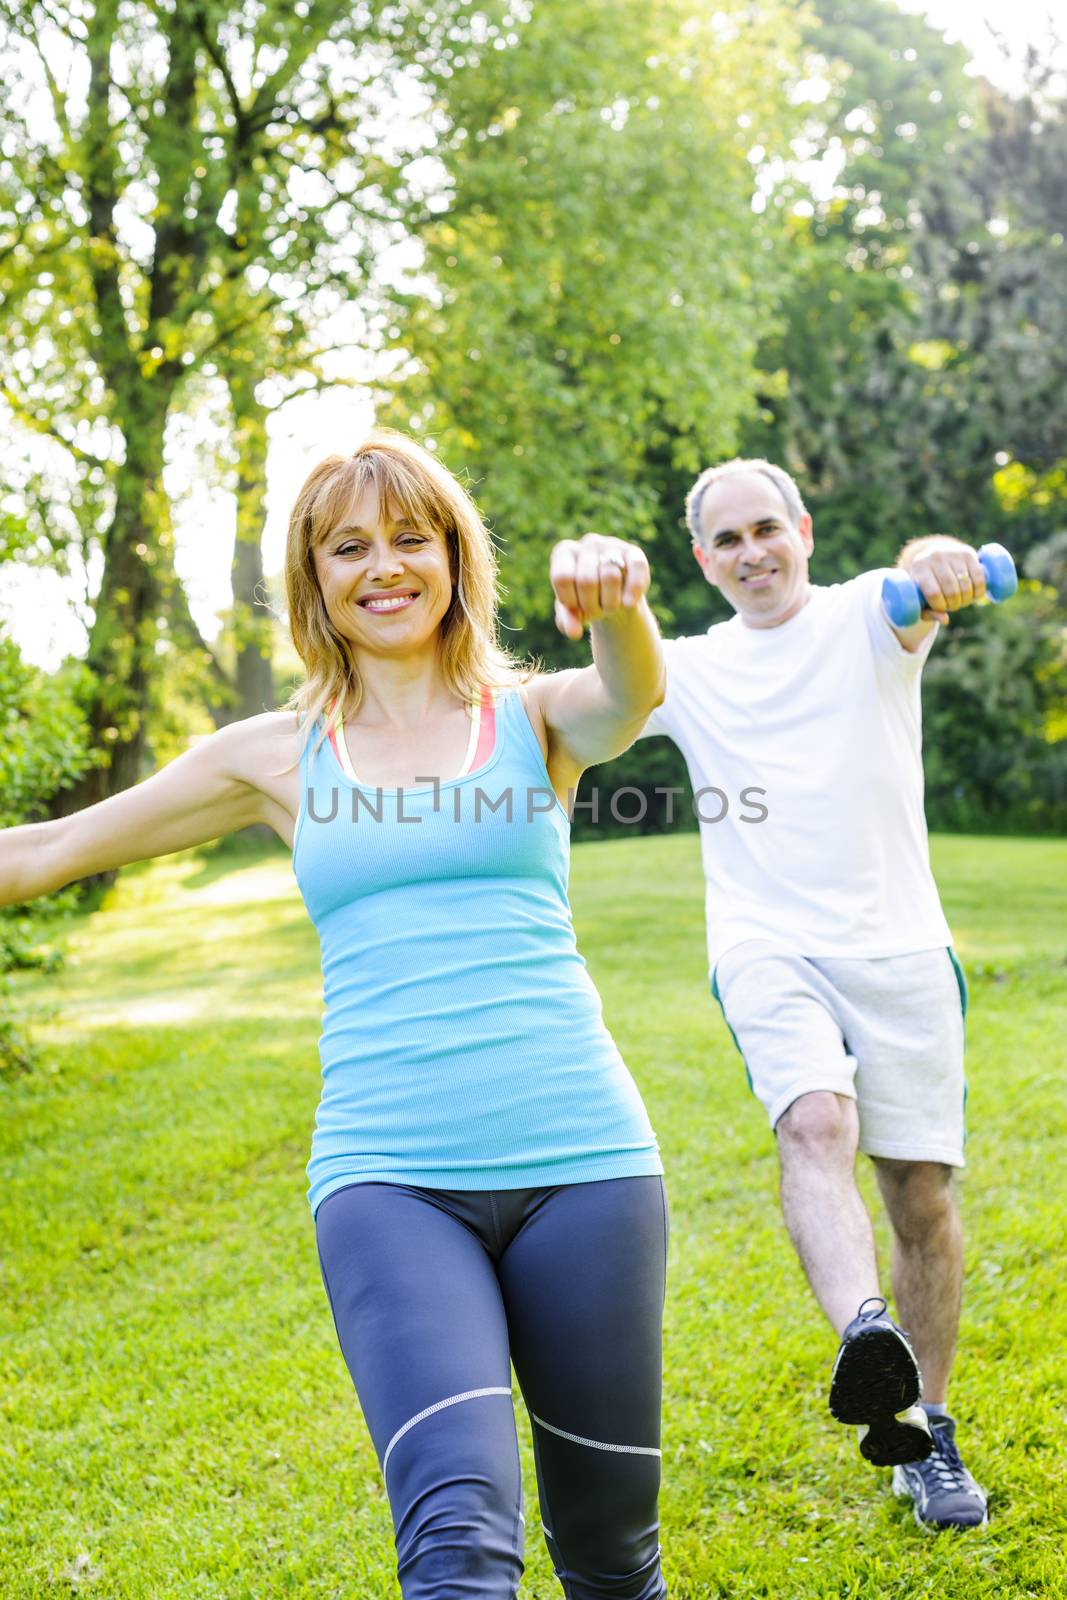 Personal trainer with client exercising in park by elenathewise